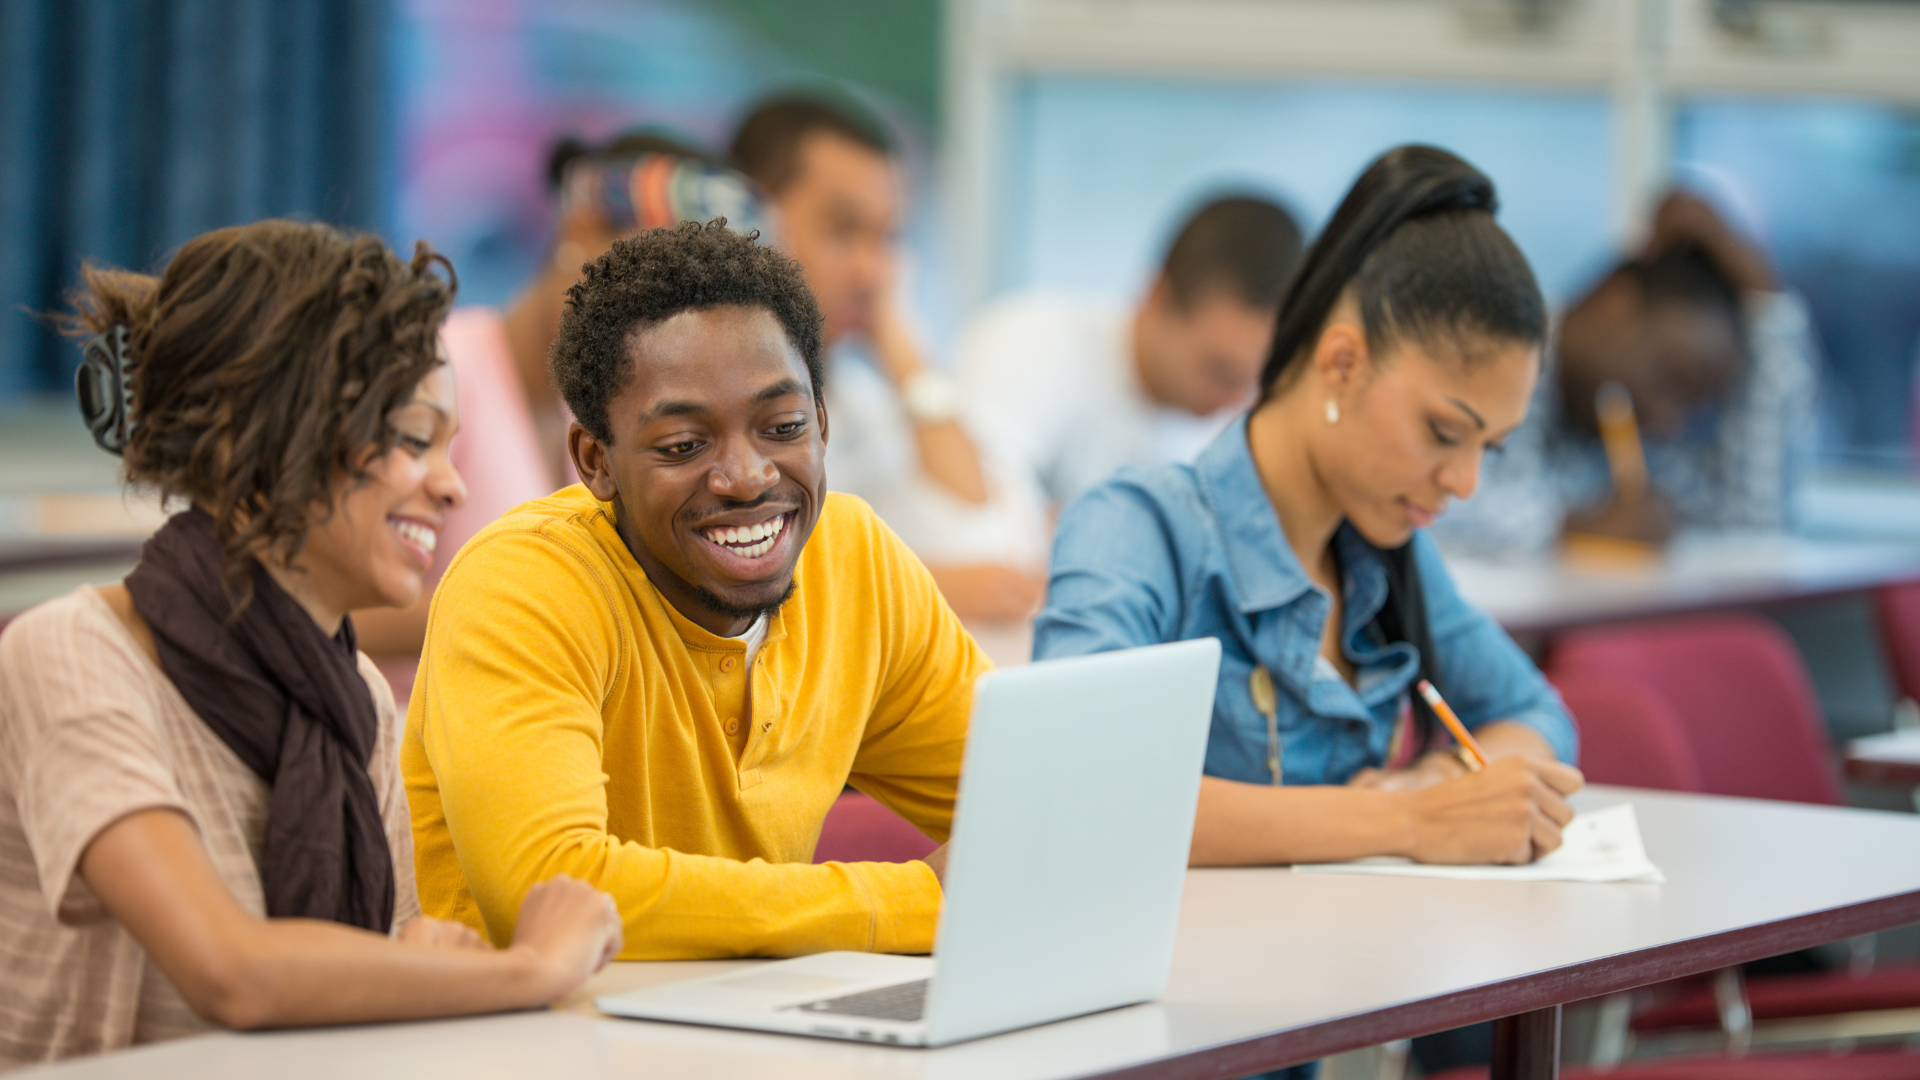 Students smiling while looking at a laptop